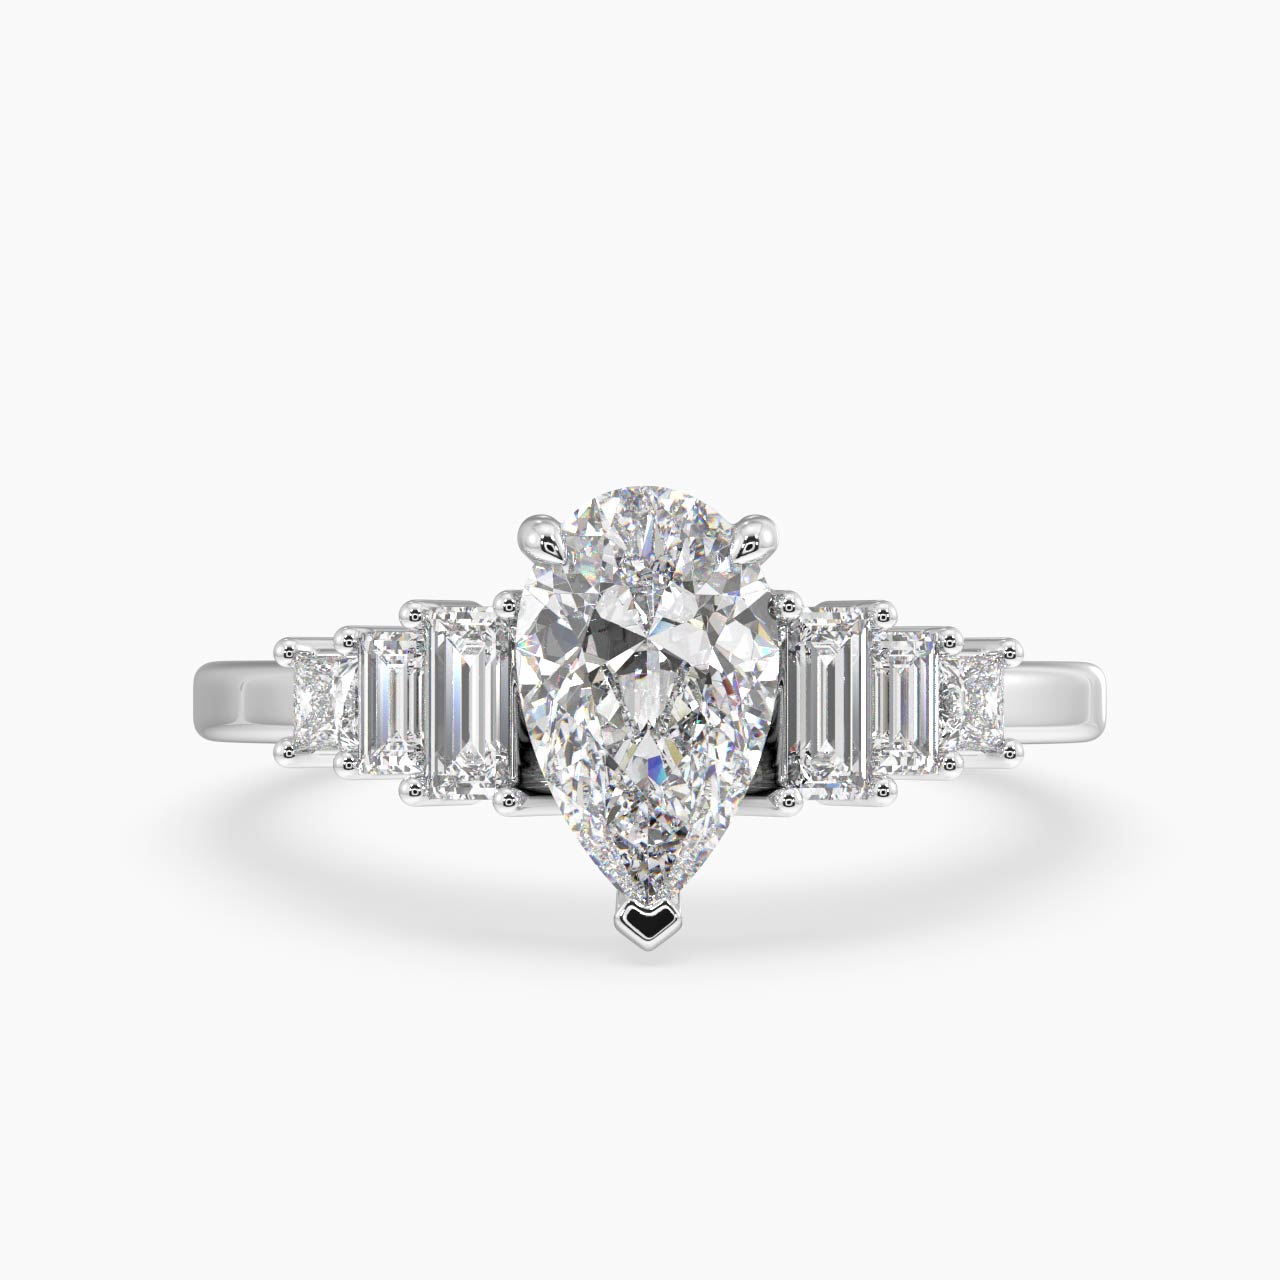 Channel-Set Engagement Ring by Love Story 309-11572 - Love Story Diamonds